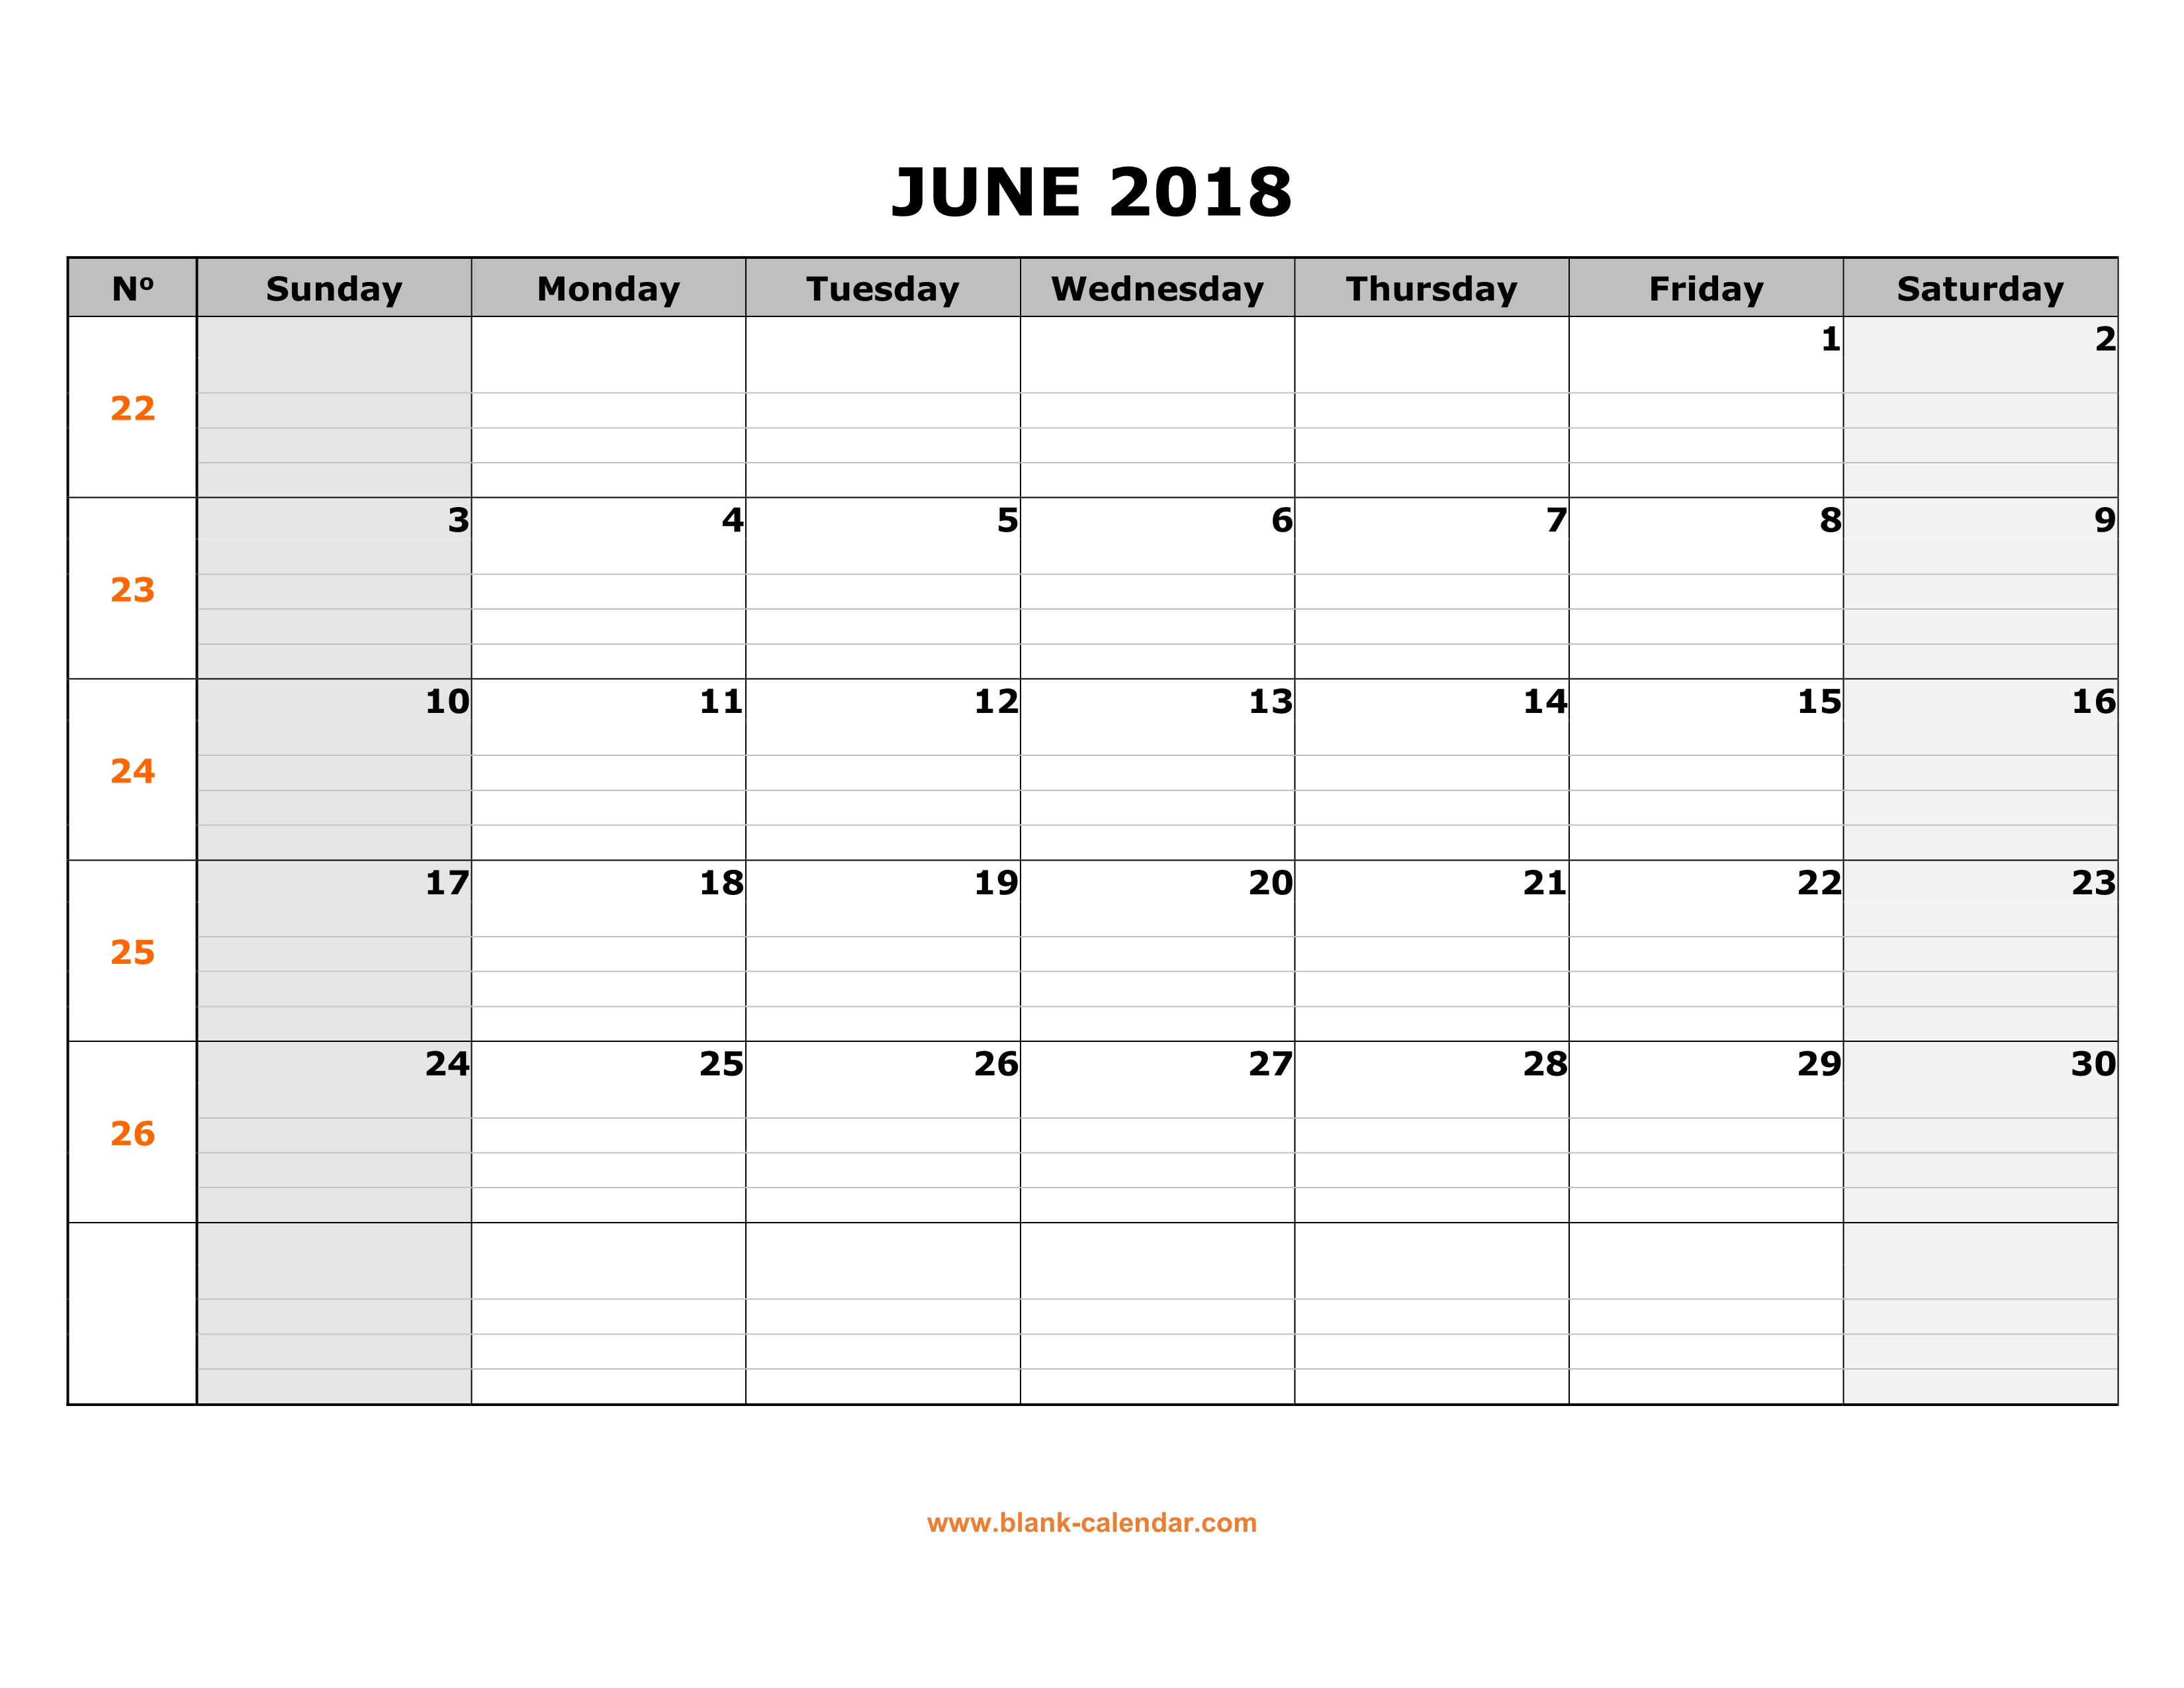 free-download-printable-june-2018-calendar-large-box-grid-space-for-notes